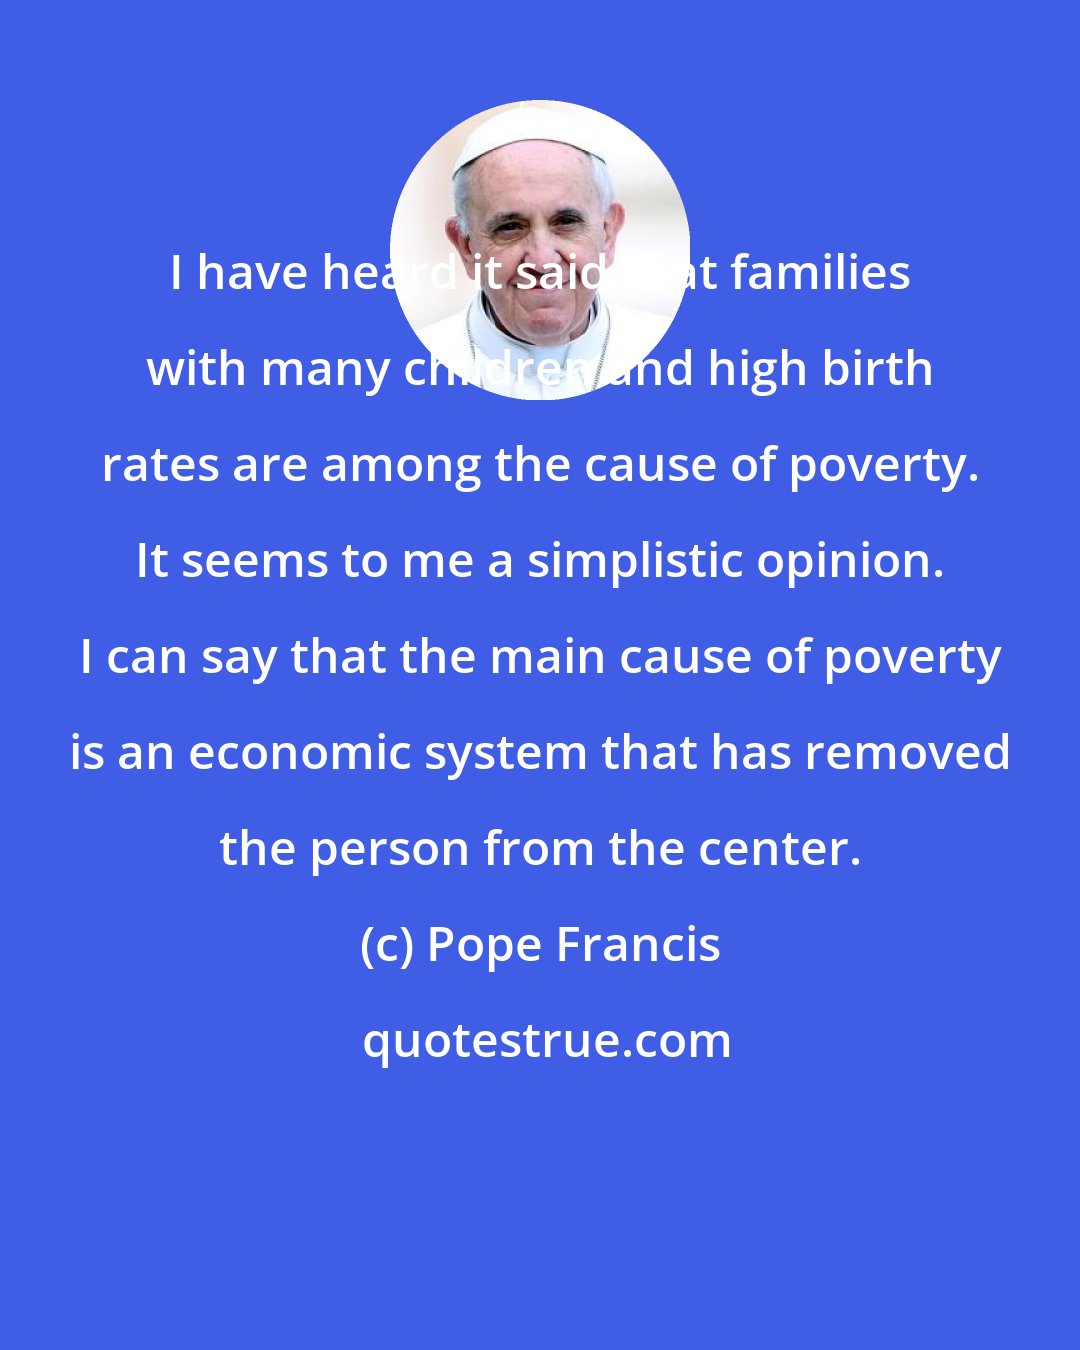 Pope Francis: I have heard it said that families with many children and high birth rates are among the cause of poverty. It seems to me a simplistic opinion. I can say that the main cause of poverty is an economic system that has removed the person from the center.